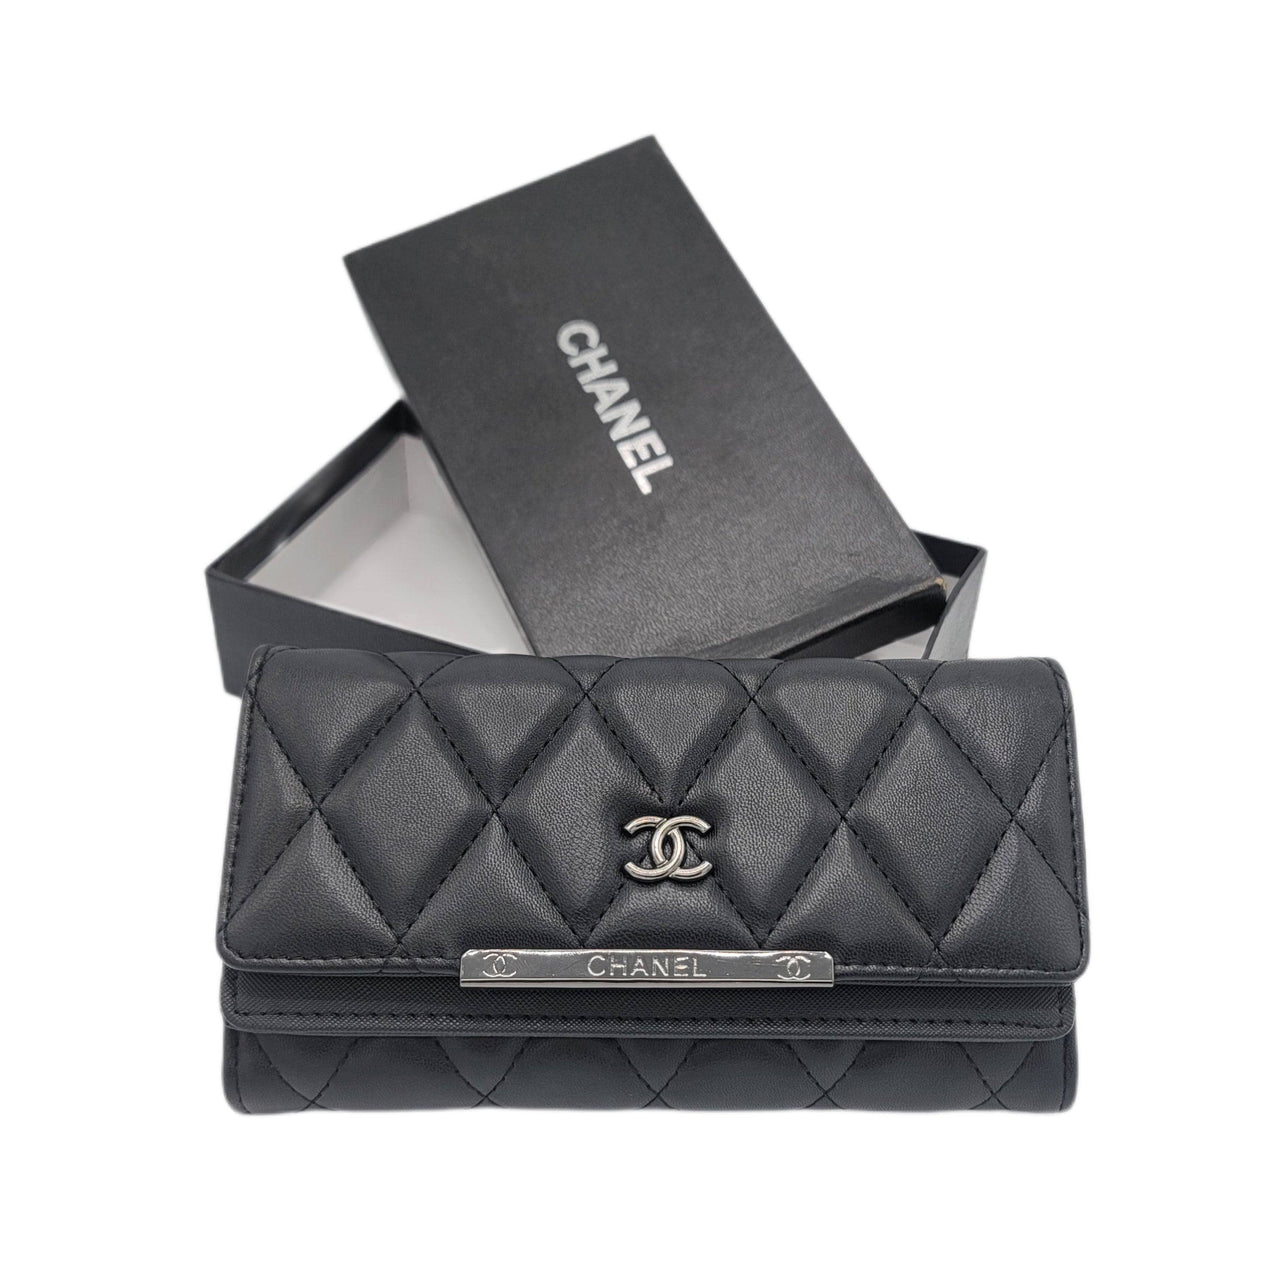 The Bag Couture Luggage & Bags Chanel 3 Fold Wallet Black & Beige